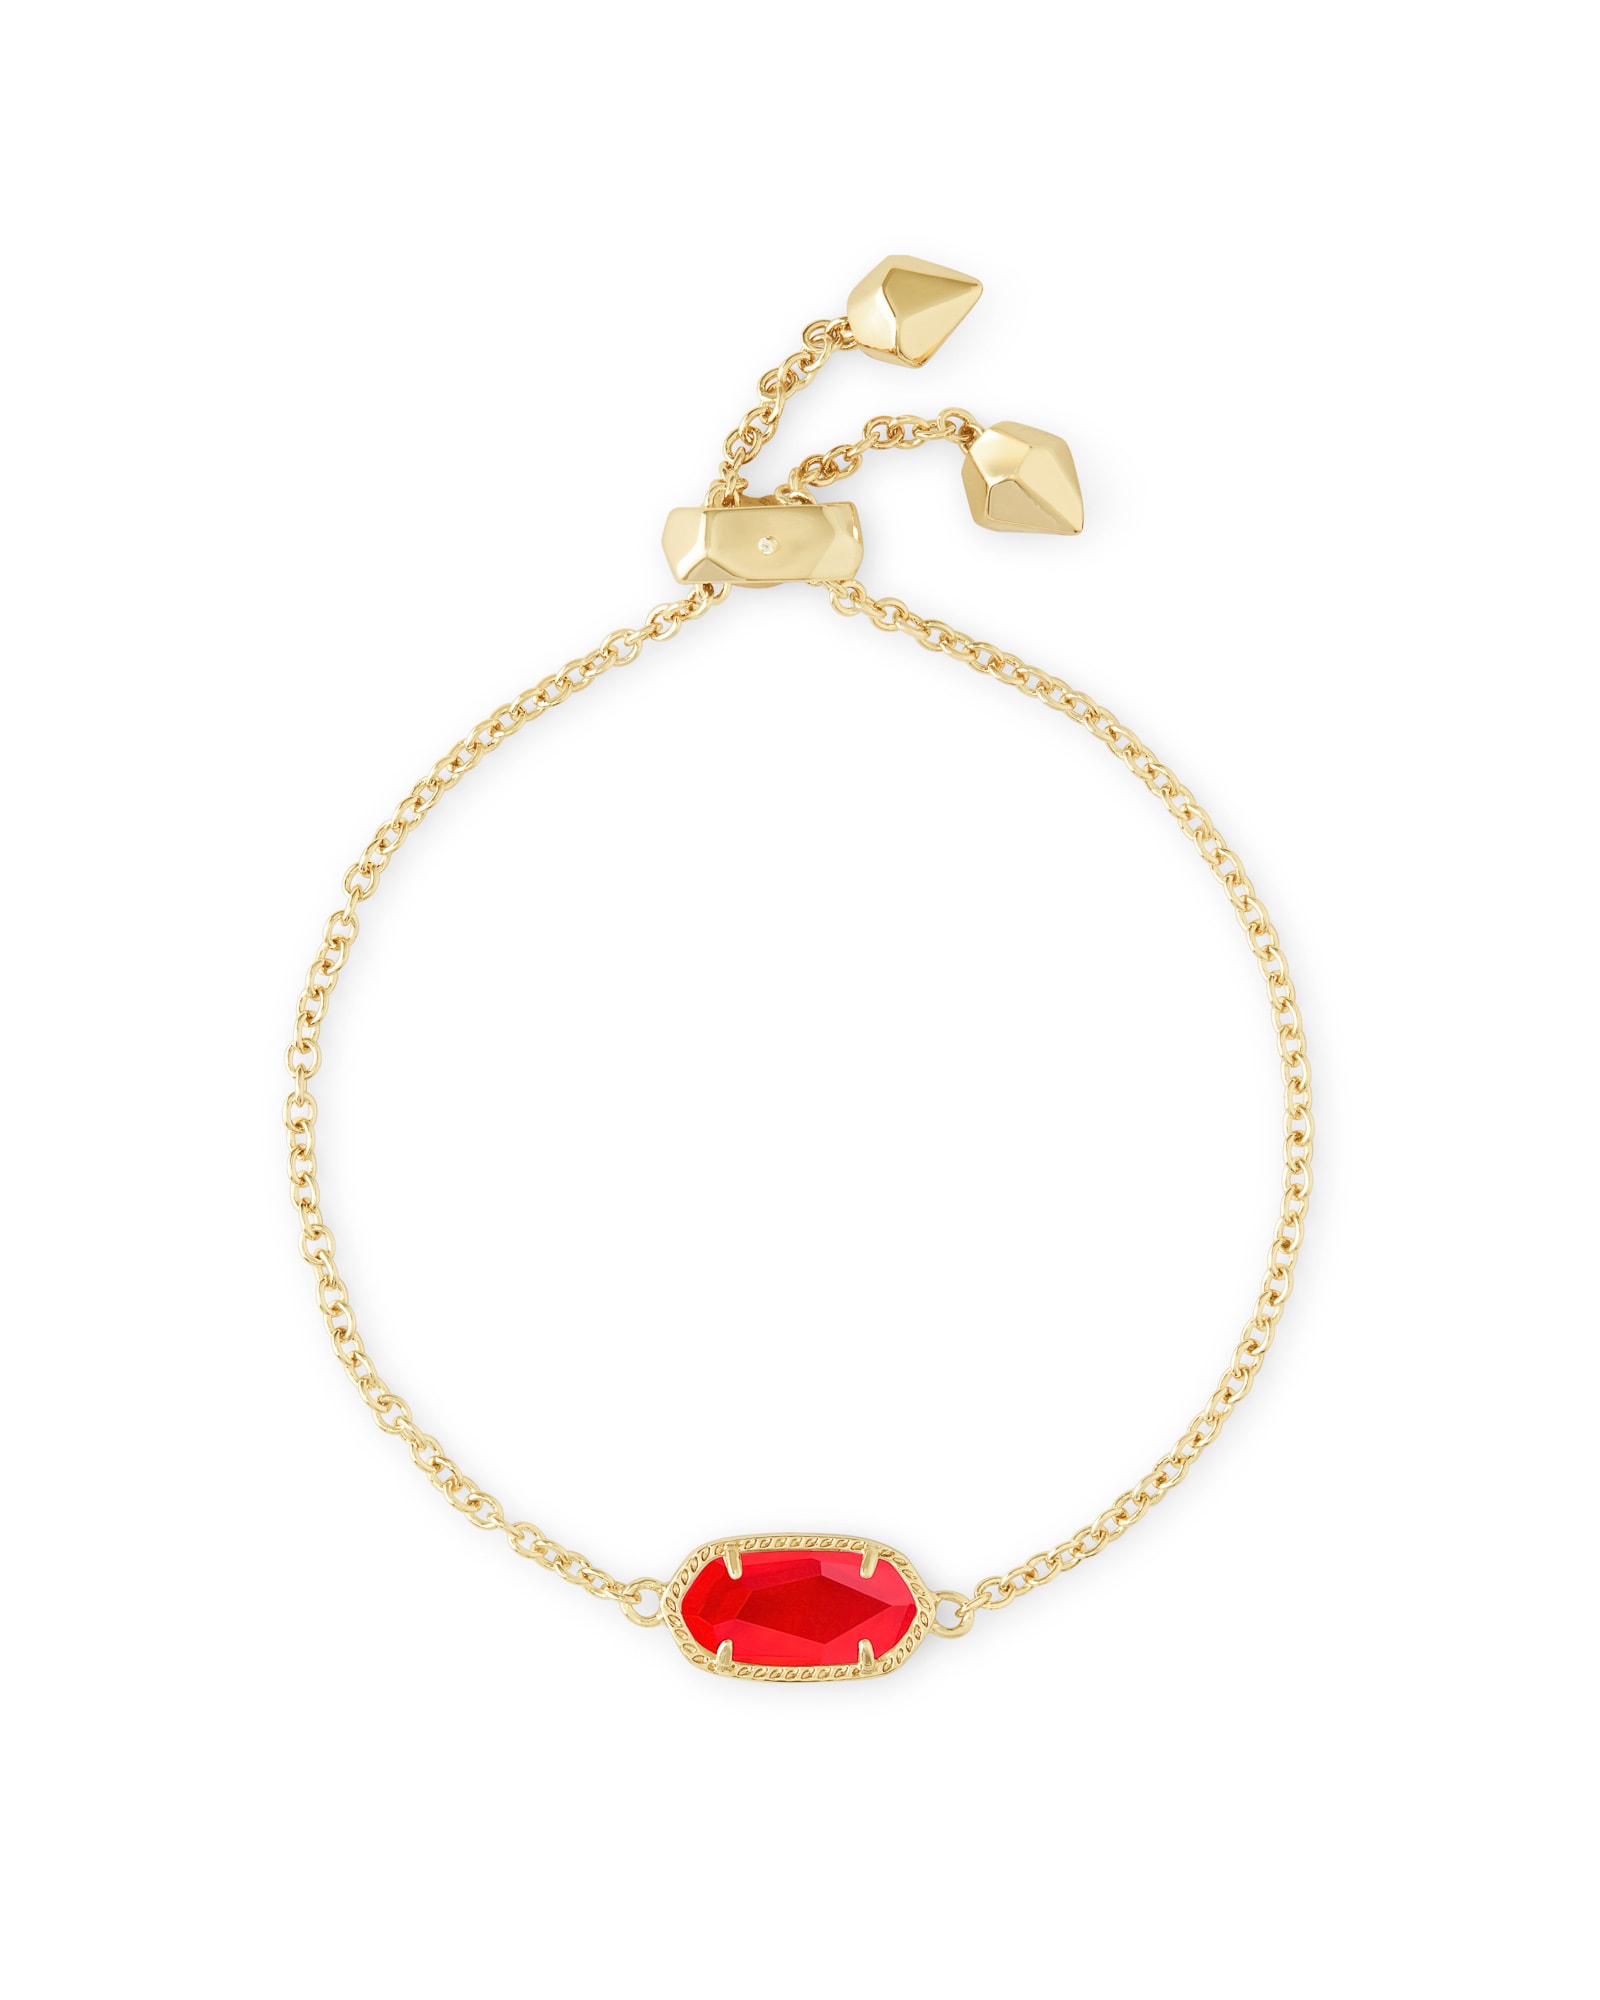 Kendra Scott Elaina Gold Adjustable Chain Bracelet in Red Illusion | Glass/Mother Of Pearl